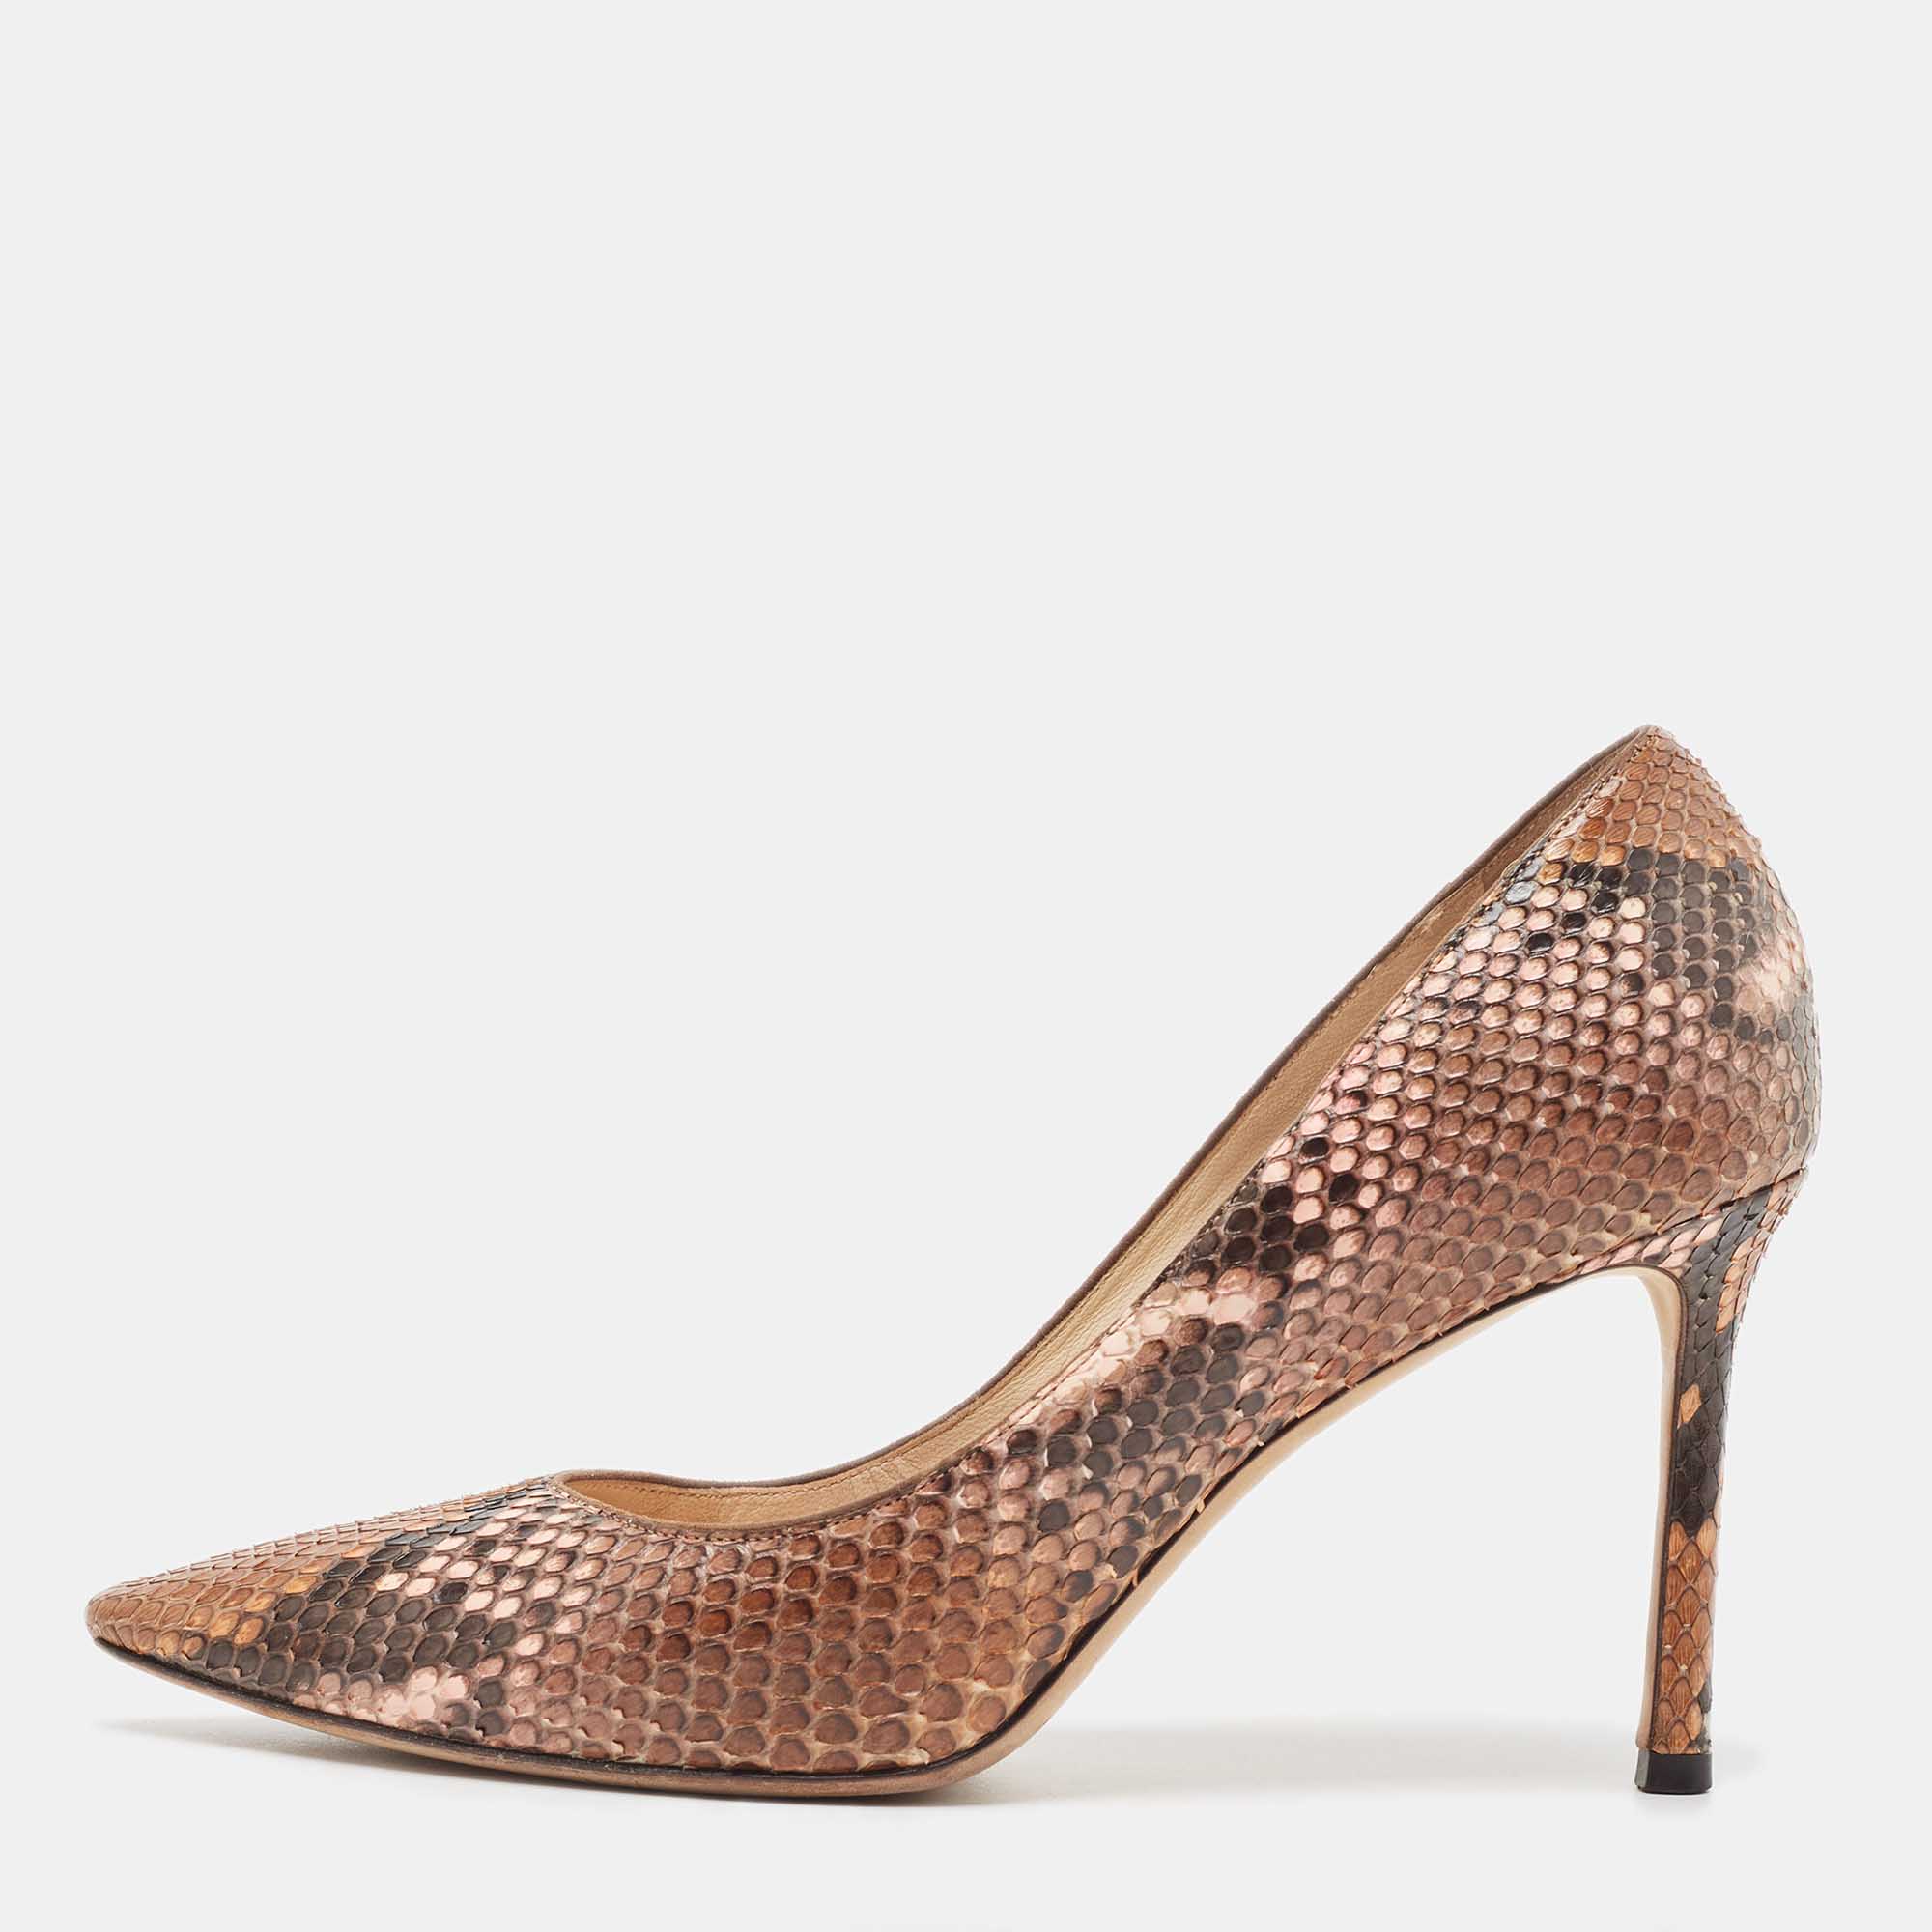 Jimmy choo brown python leather abel pointed toe pumps size 37